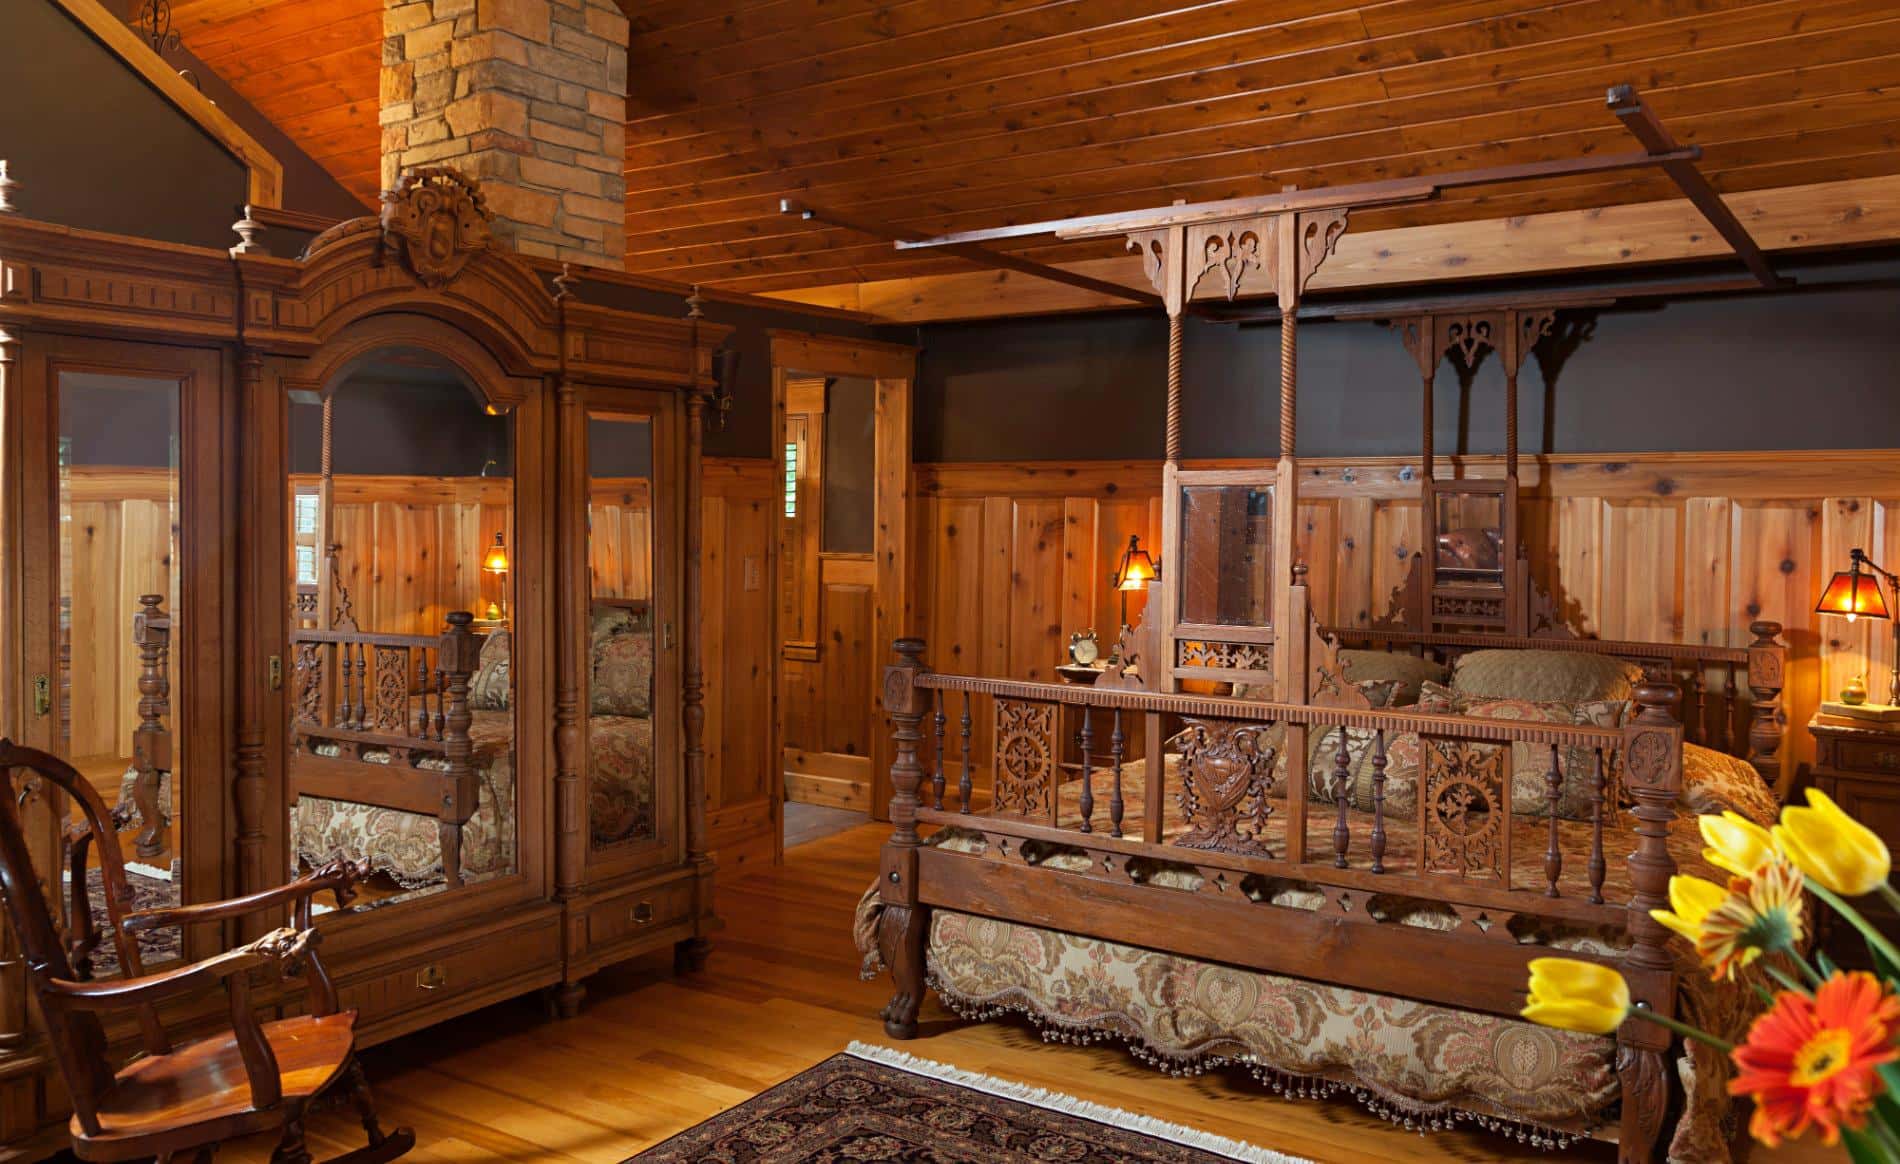 Rustic room with pine ceiling, walls and floor, elaborately carved king sized bed, and mirrored cabinet with triple doors